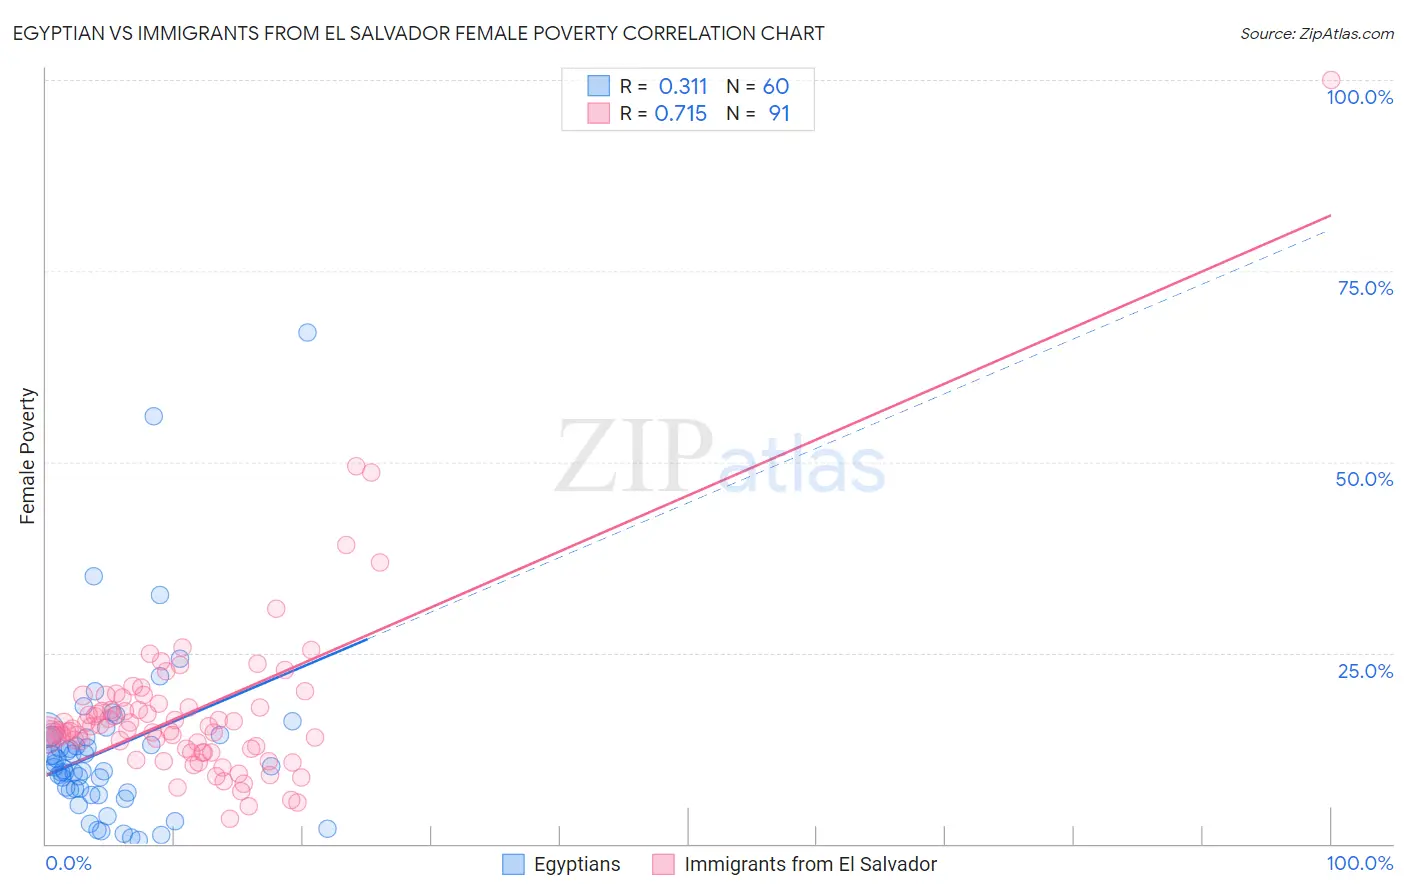 Egyptian vs Immigrants from El Salvador Female Poverty